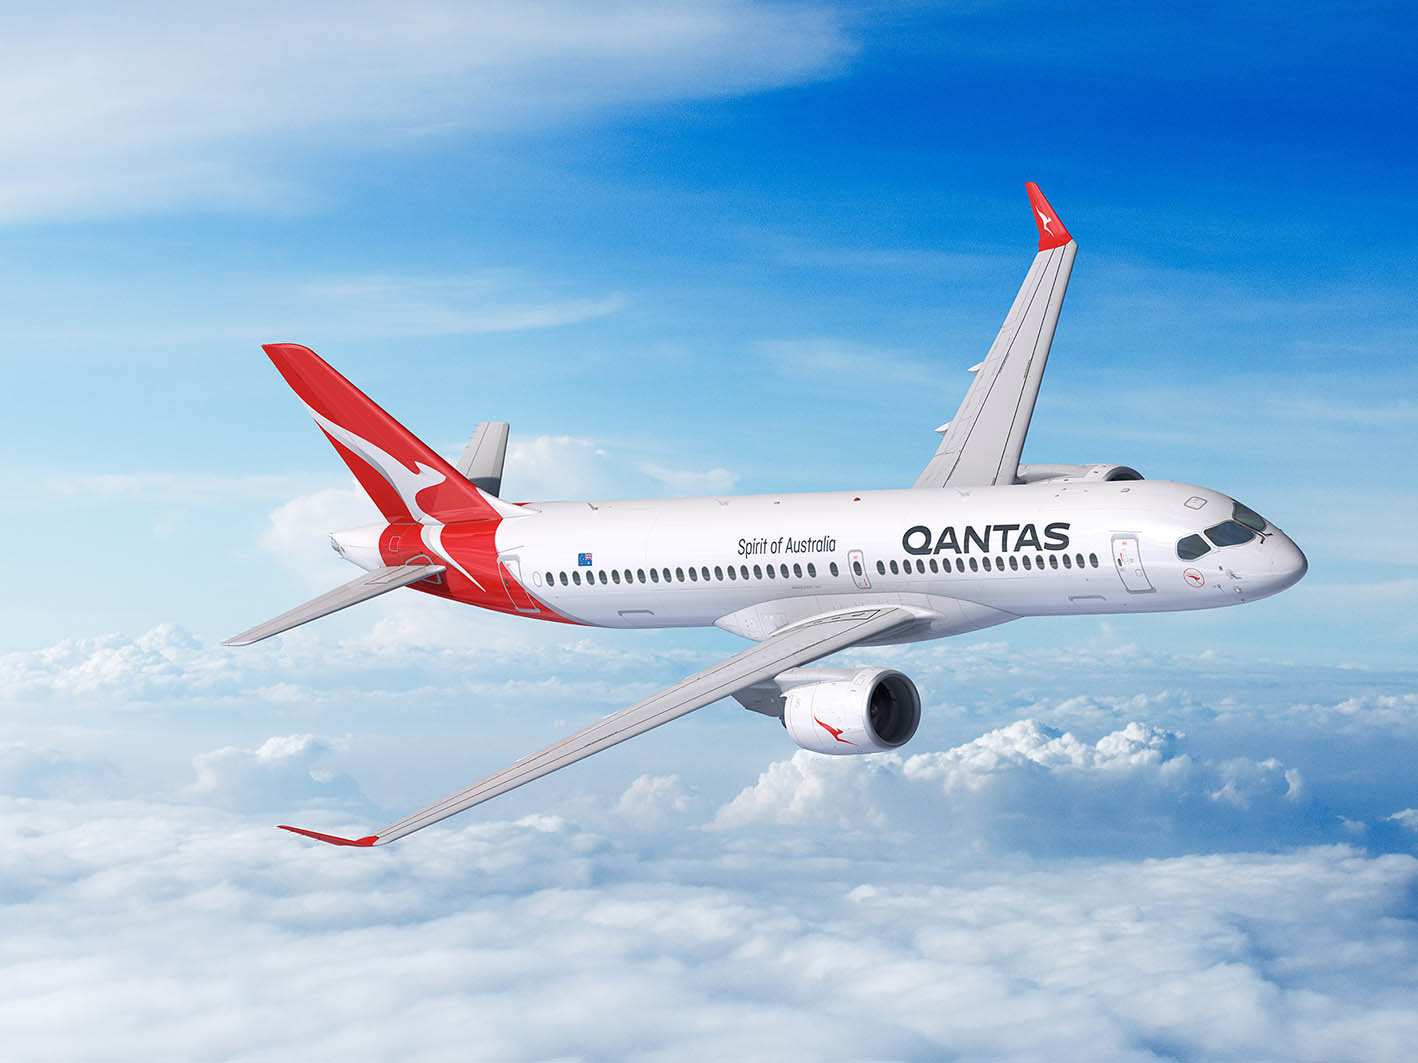 Qantas Under Fire for Selling Tickets for Canceled Flights: Is This Common Practice?